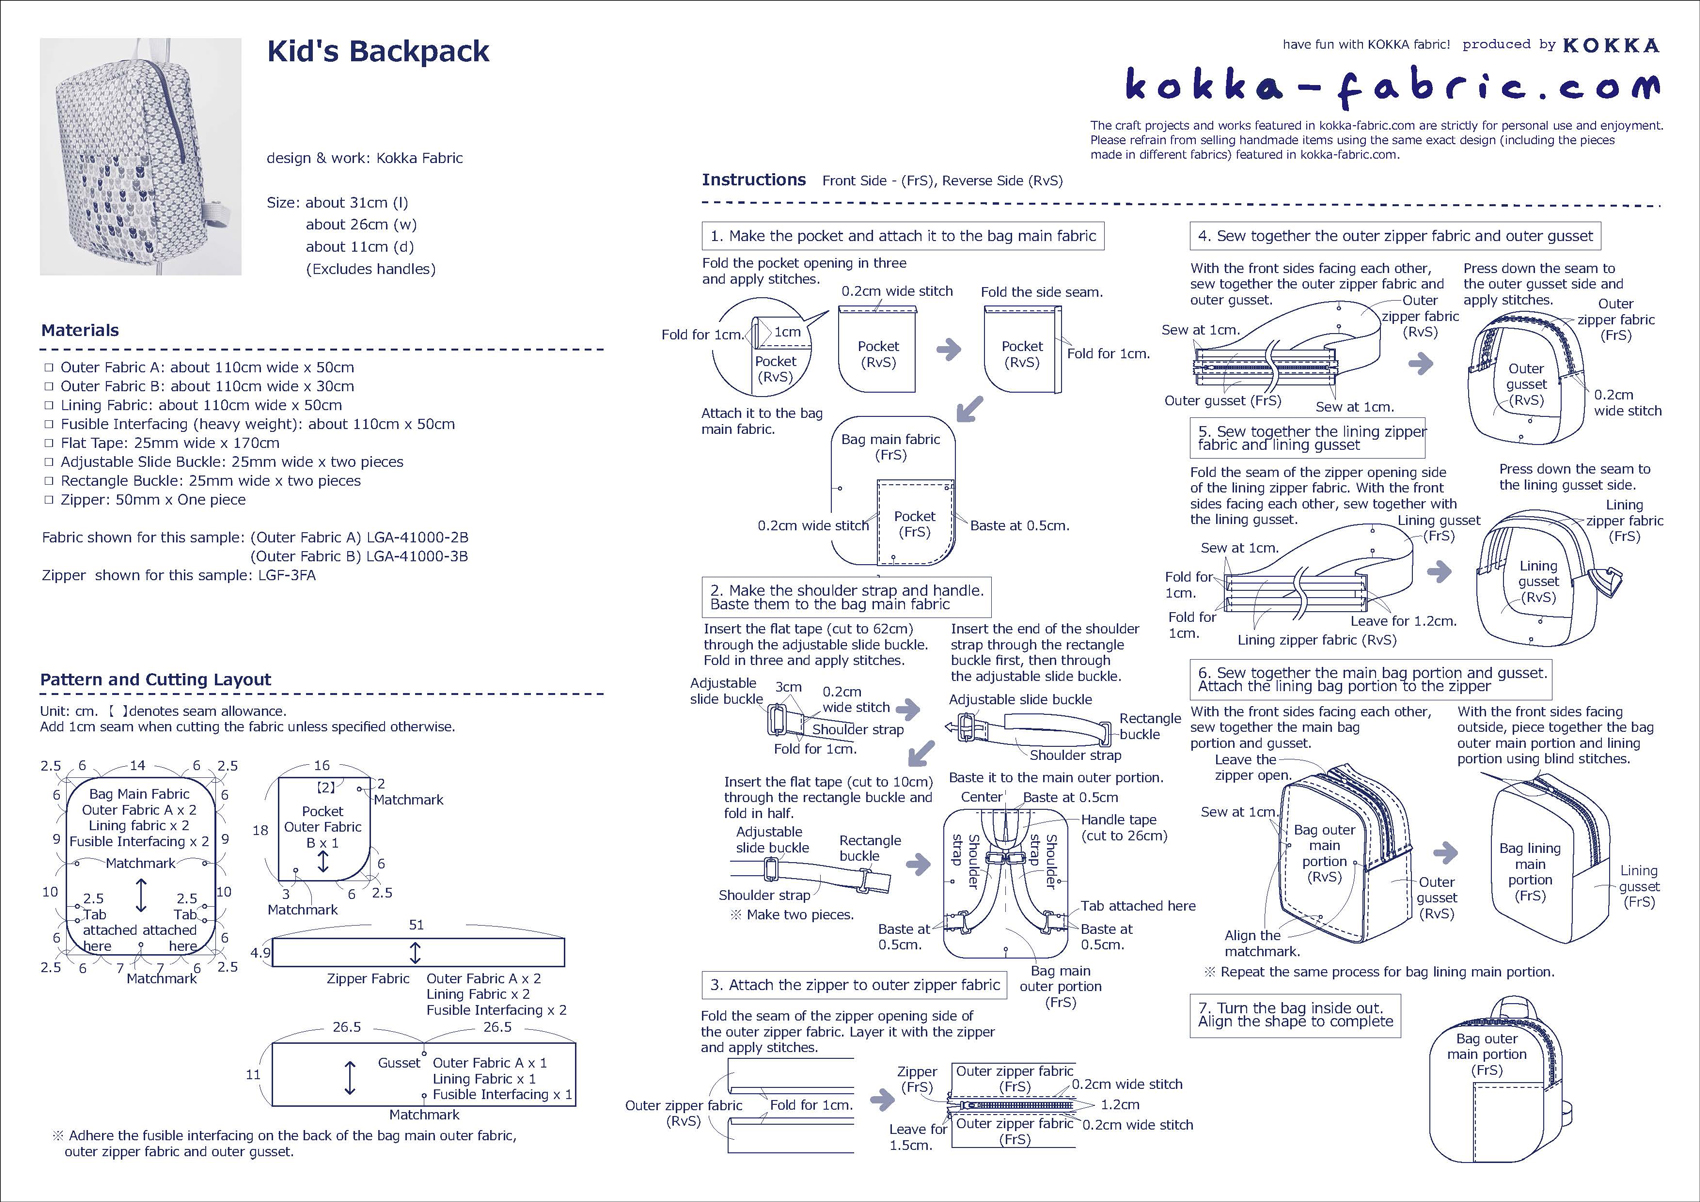 Kid's Backpack – Sewing Instructions | KOKKA-FABRIC.COM | have fun with ...